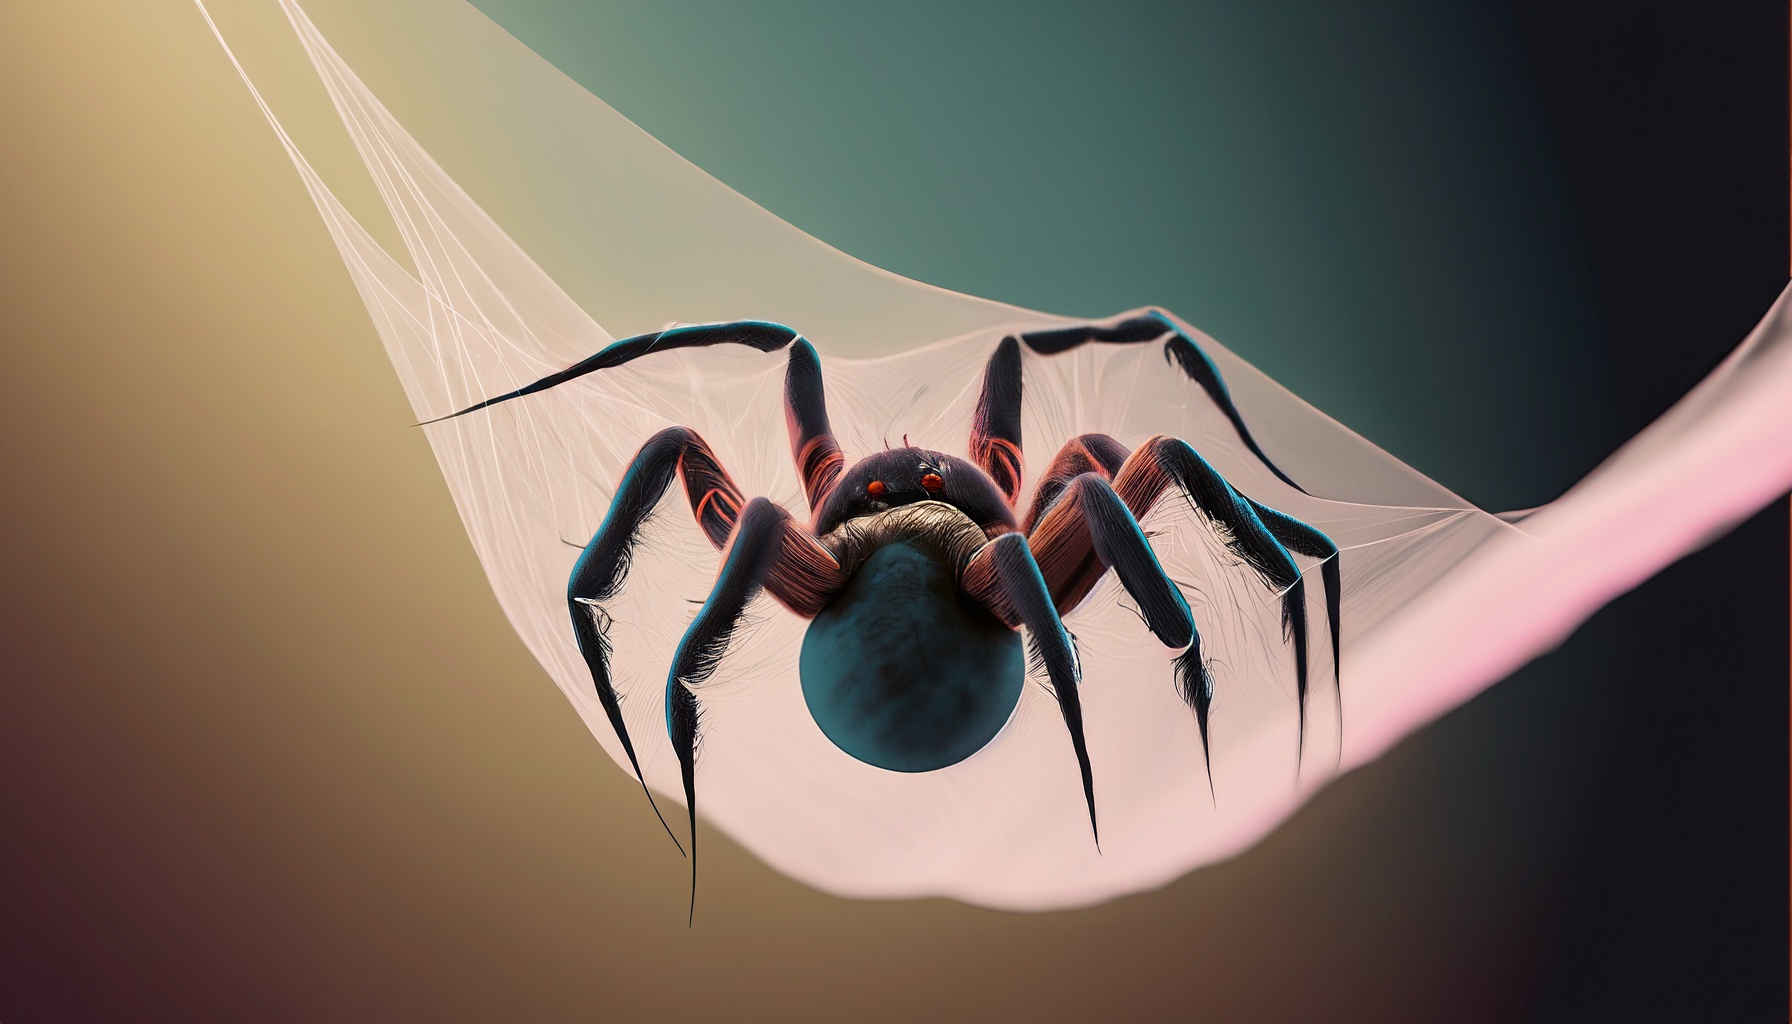 Spiders can fly using a process called ‘ballooning’